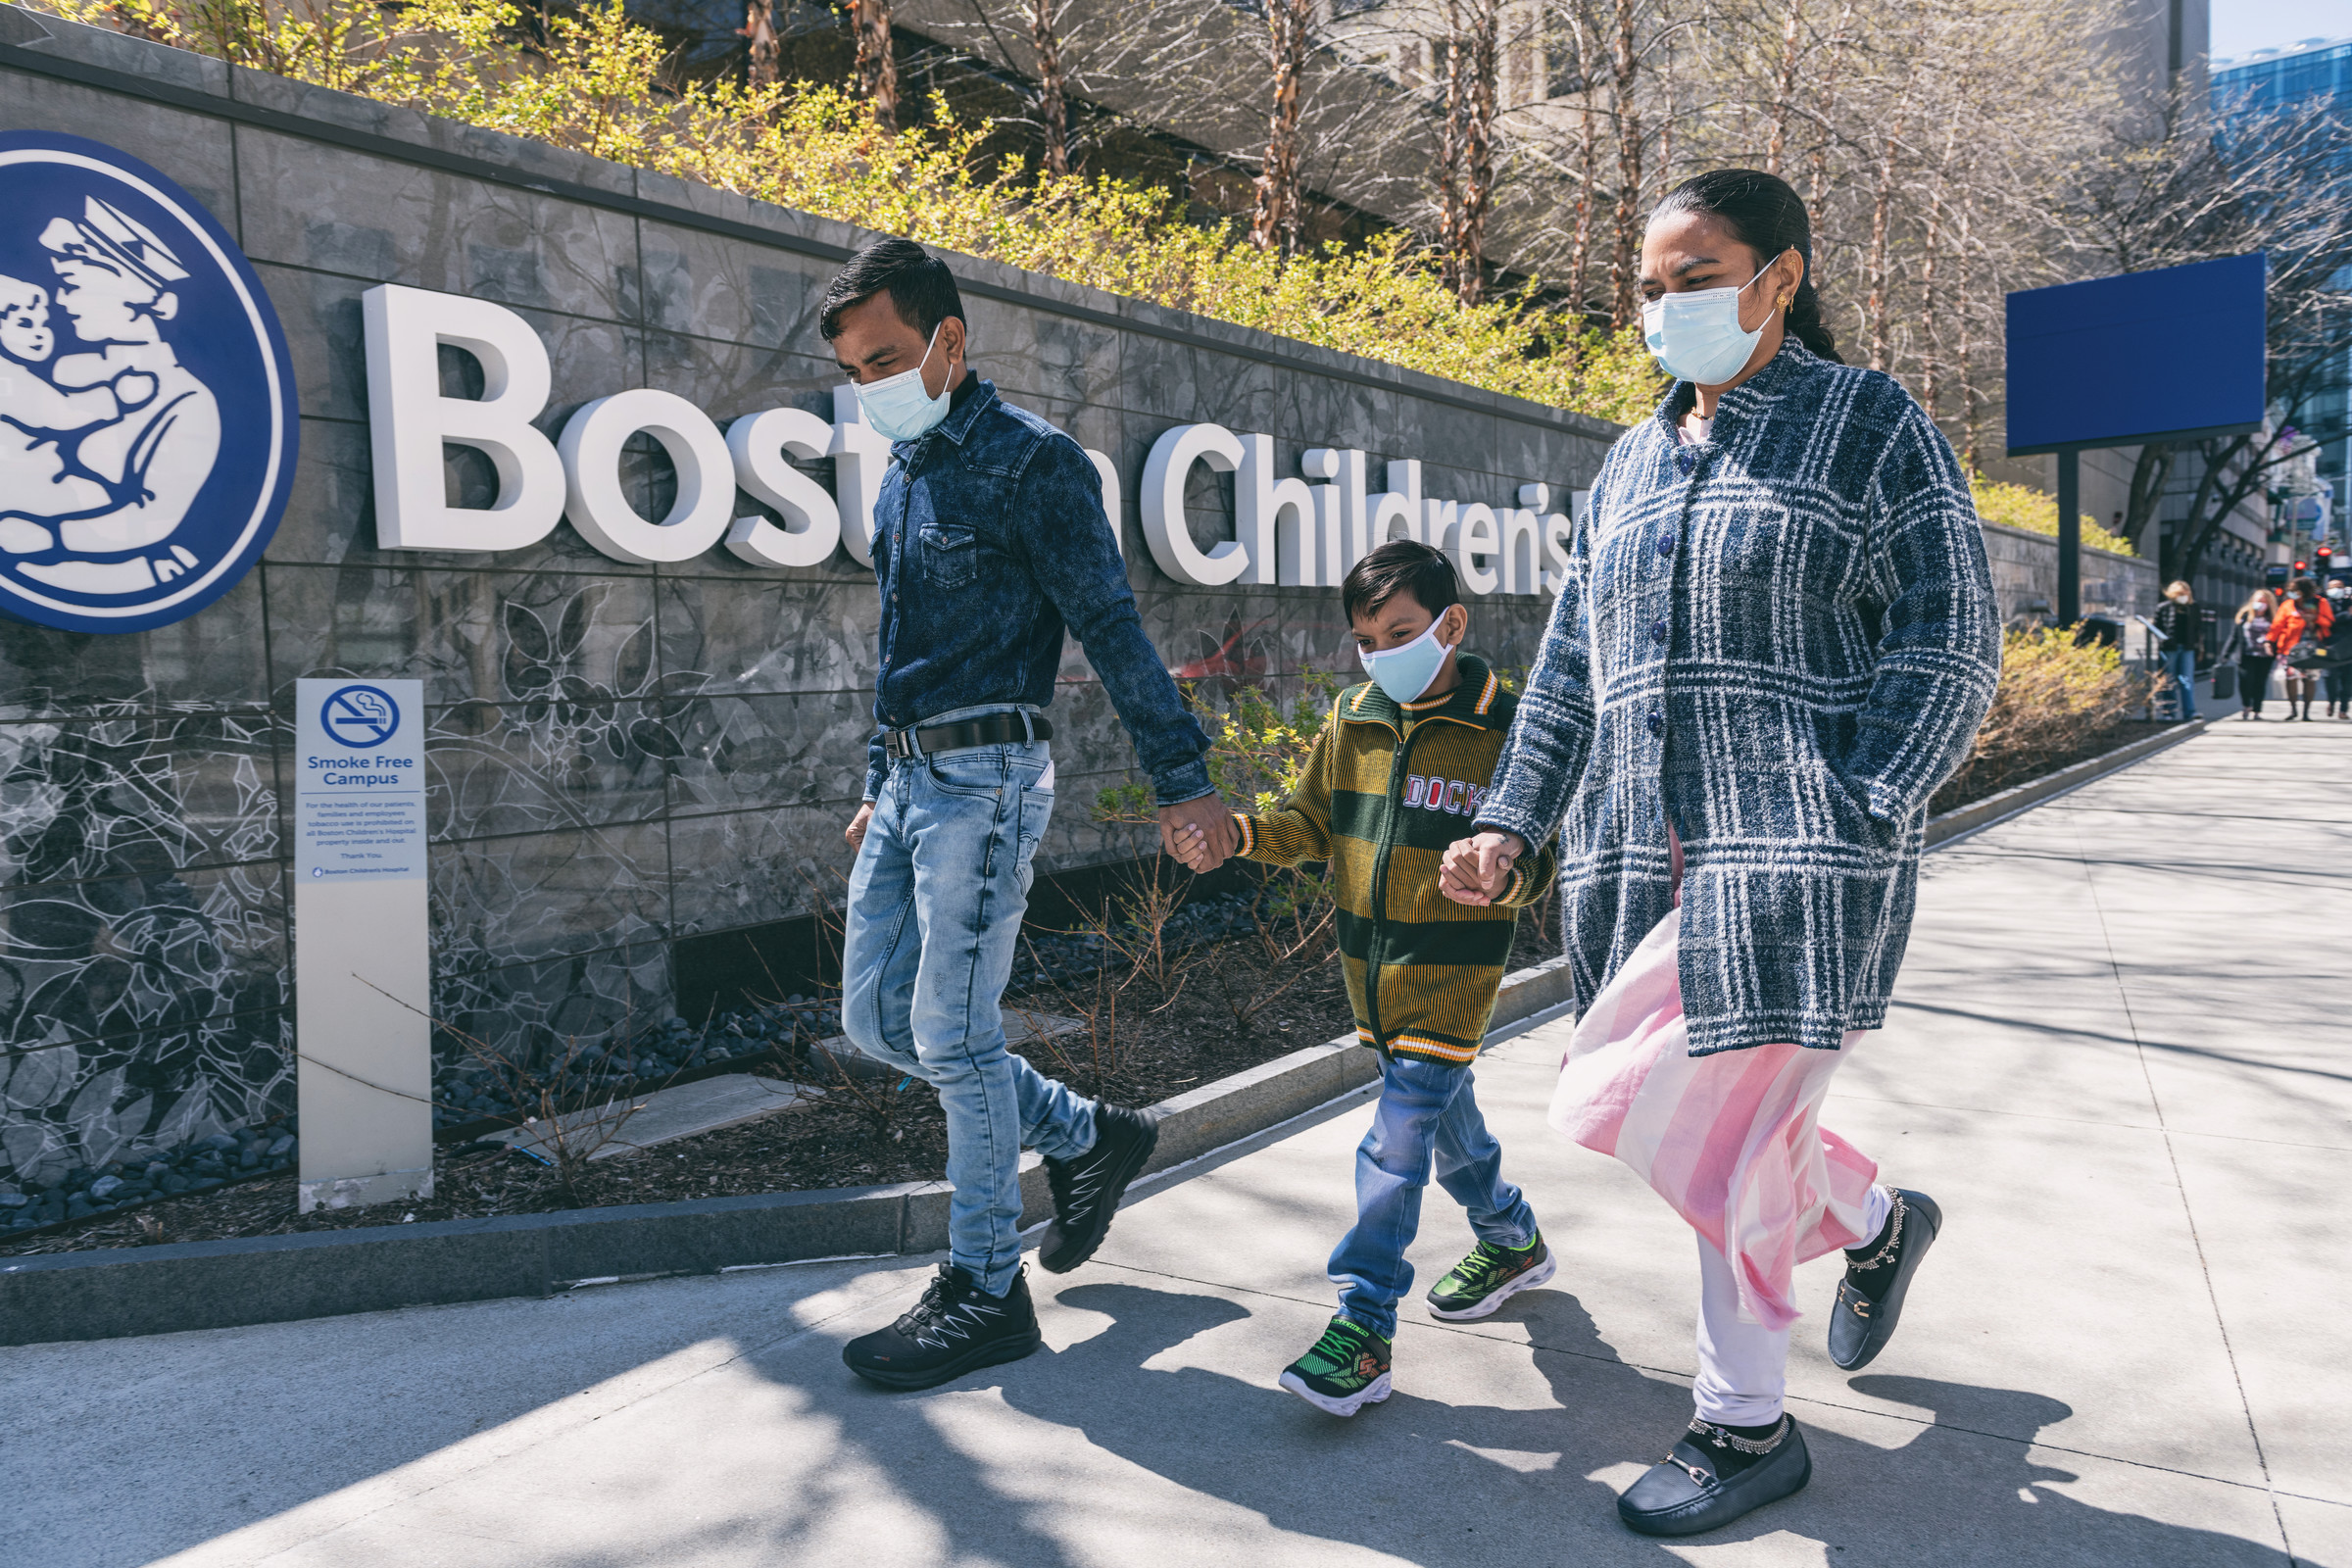 Parents on each side of boy hold his hand as they enter Boston Children's Hospital campus